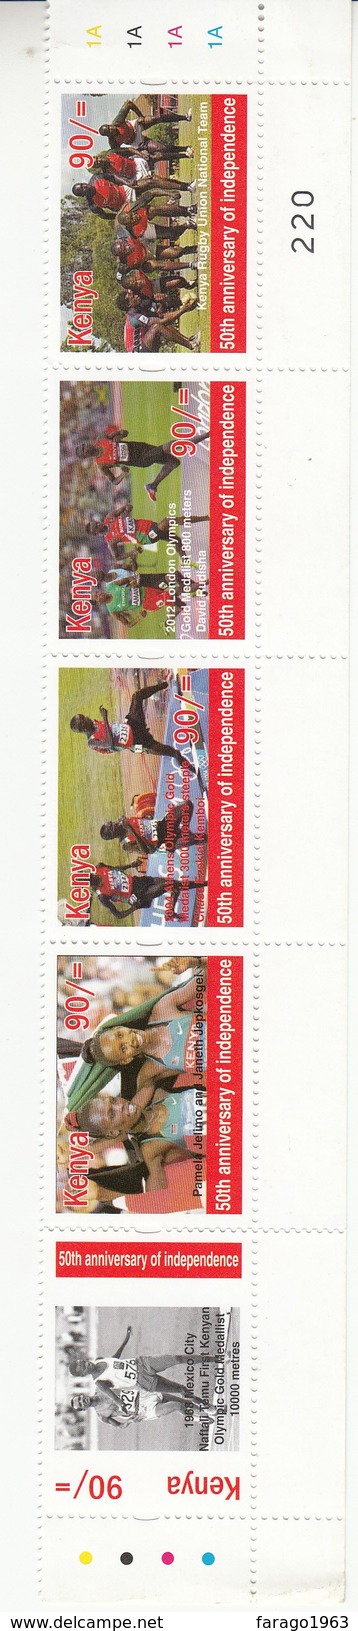 Kenya 2013  Athletics Strip Of 5 X 30/-  - Taken Out Of Sheet Of 25 Different Stamps - Cheaper Than Buying Sheet!! - Athletics